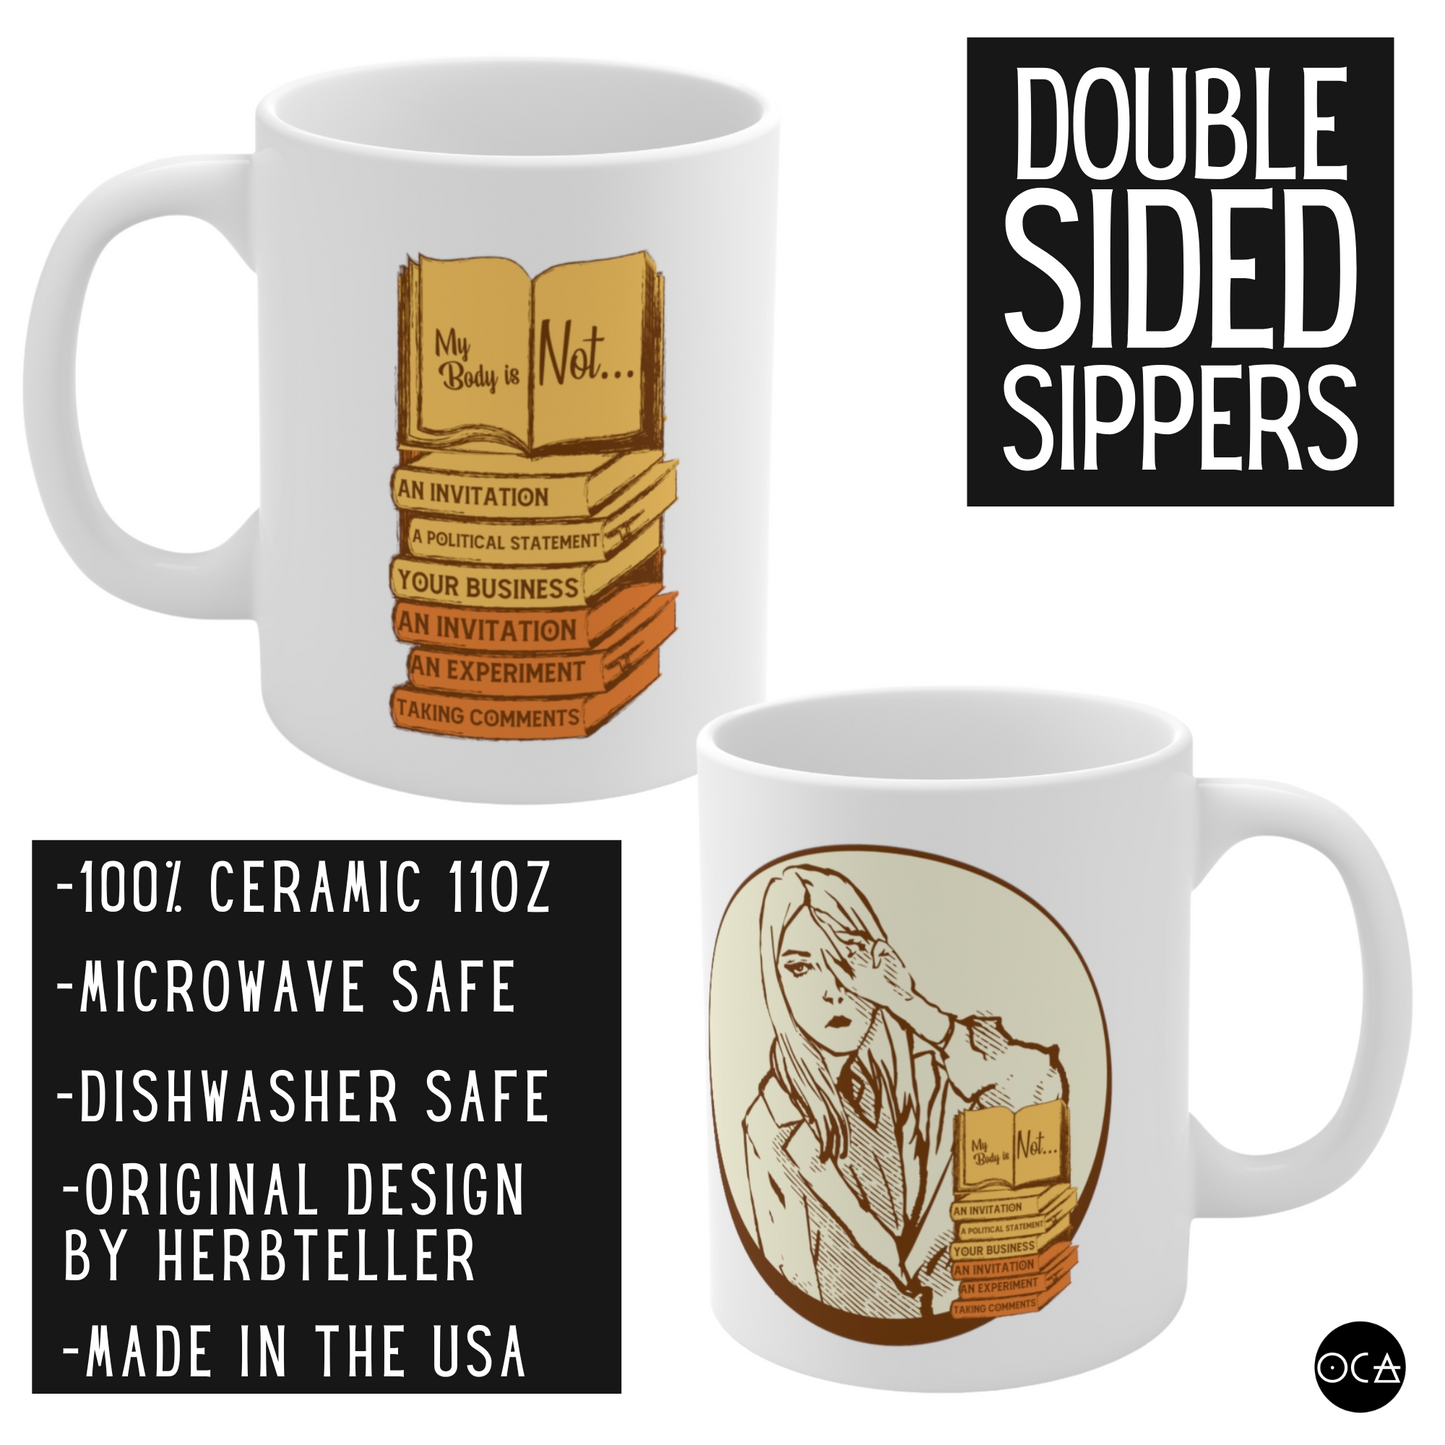 My Body is Not Mug (Doublesided/2 Color & Design Options)